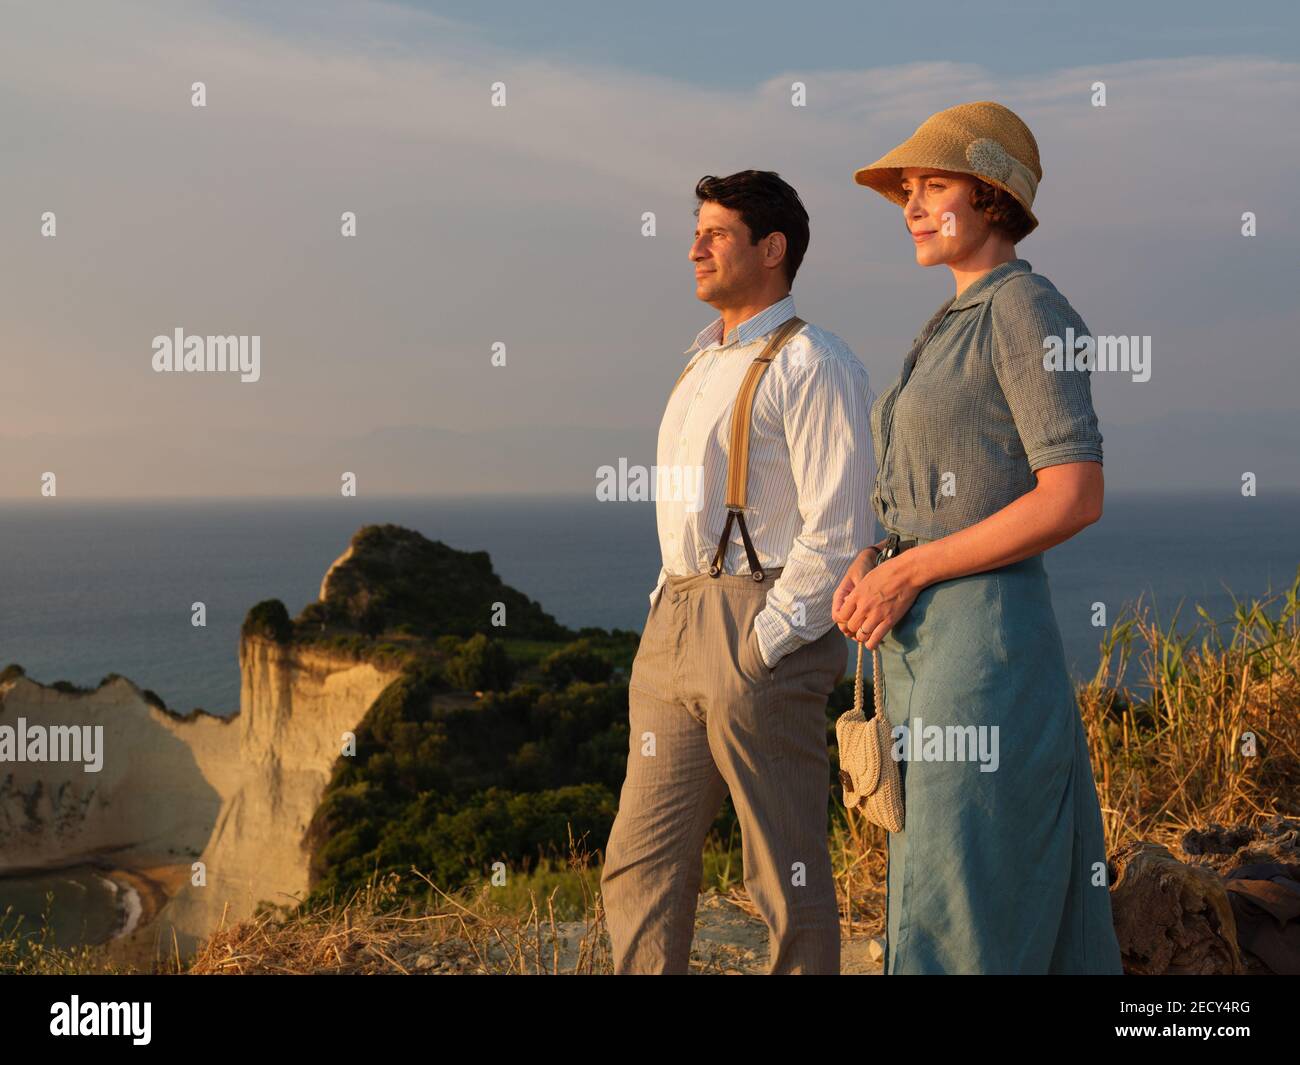 KEELEY HAWES and ALEXIS GEORGOULIS in THE DURRELL (2016). Episode 3x8. Credit: Sid Gentle Films/Masterpiece Theatre/ITV - Independent Television / Album Stock Photo